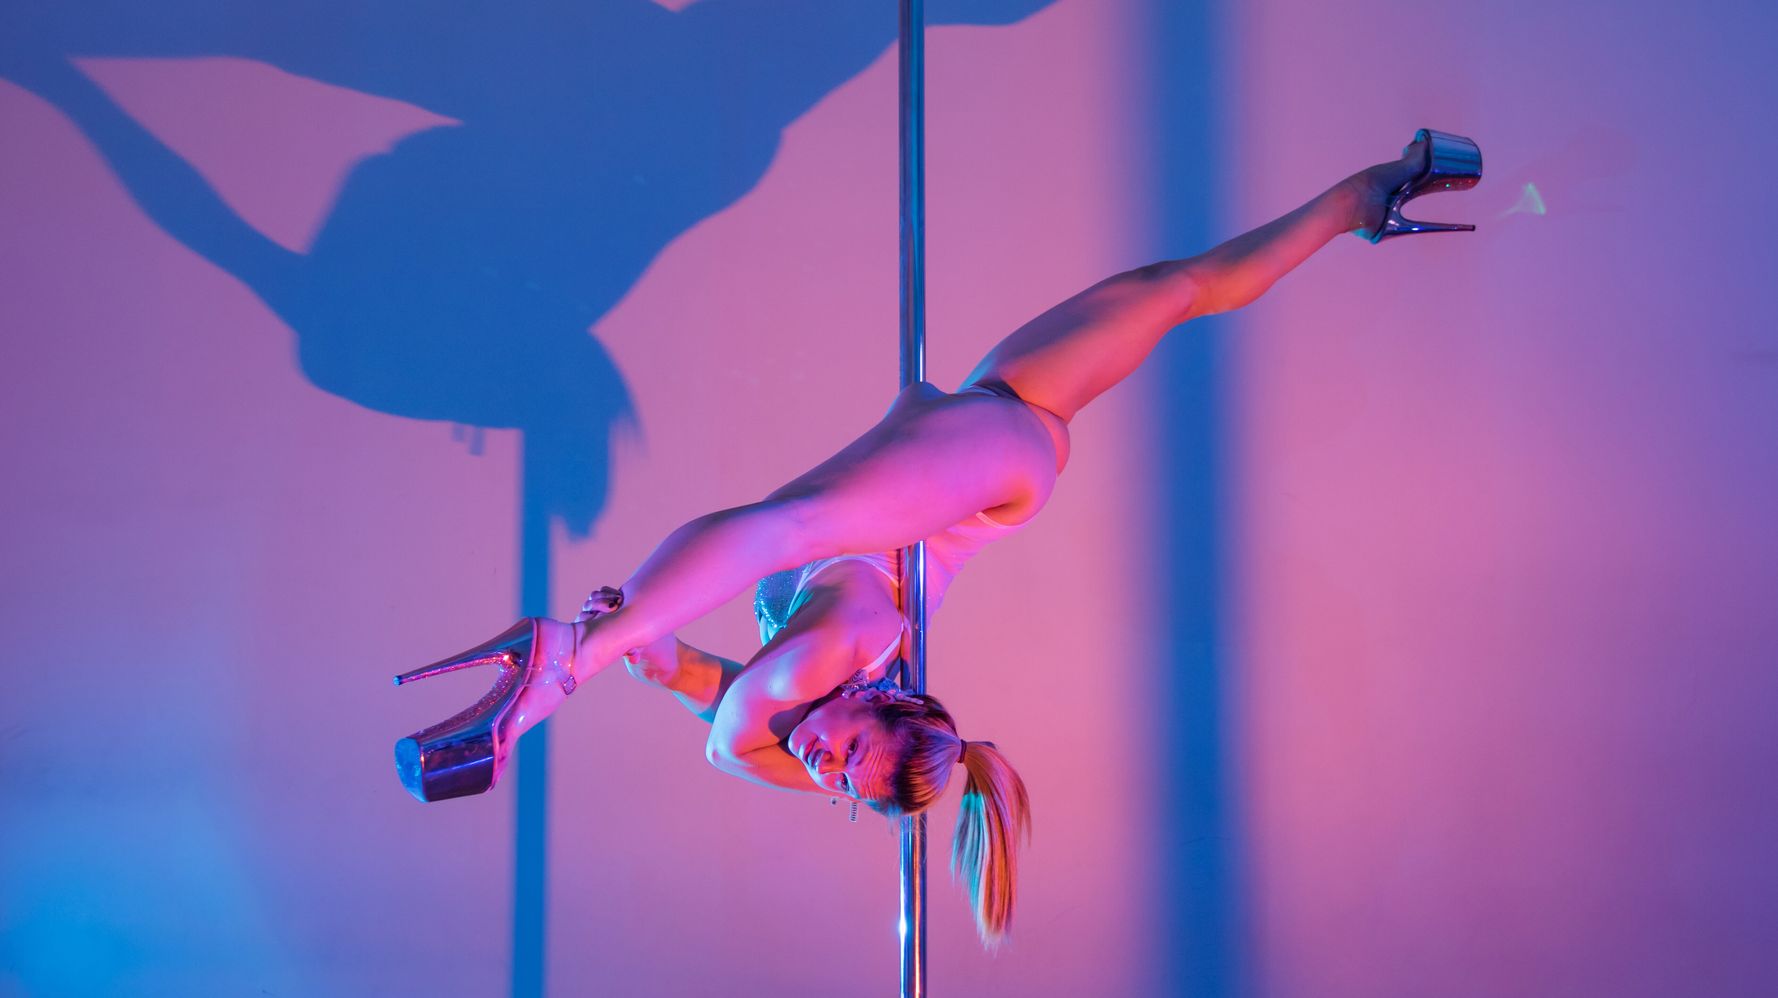 1778px x 998px - When I Was Outed For My Porn Past, Pole Dancing Helped Me Heal | HuffPost  HuffPost Personal